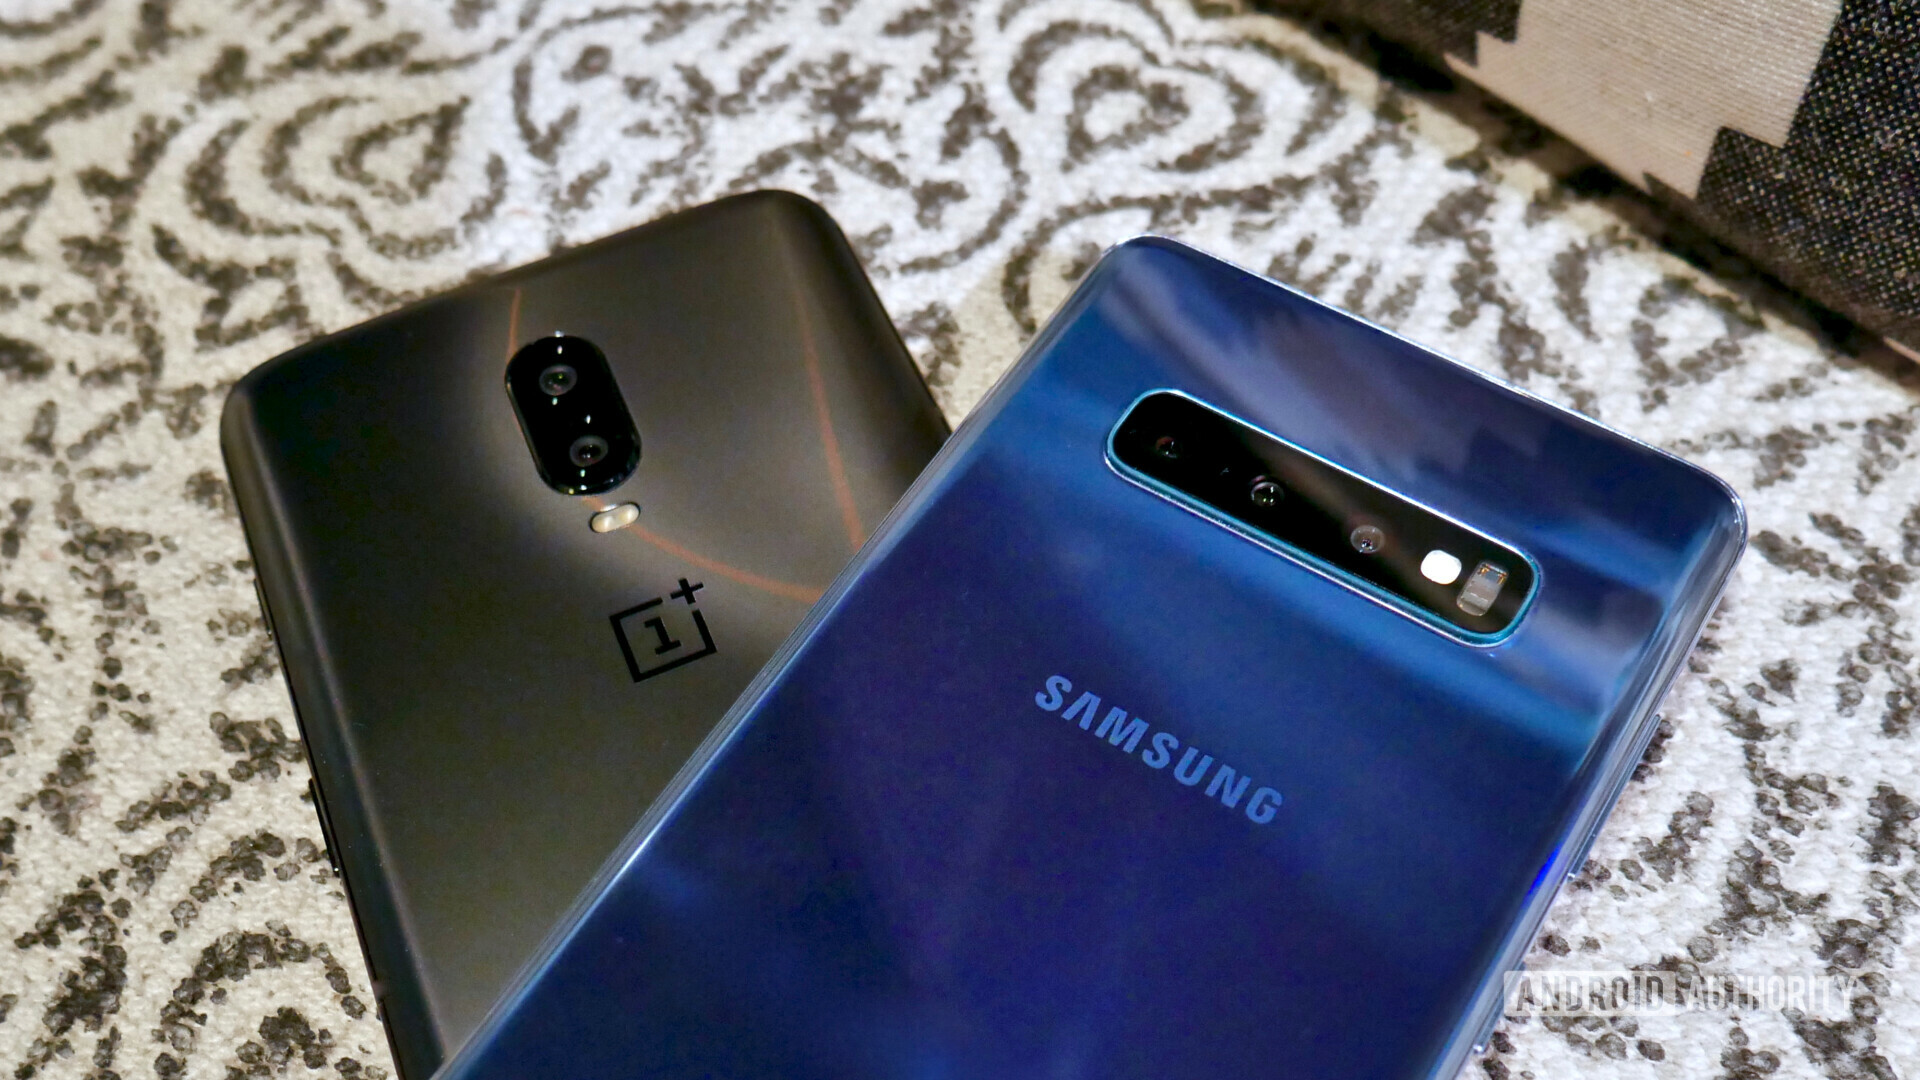 Backside of the Samsung Galaxy S10 next to an OnePlus 6T focusing on the cameras.